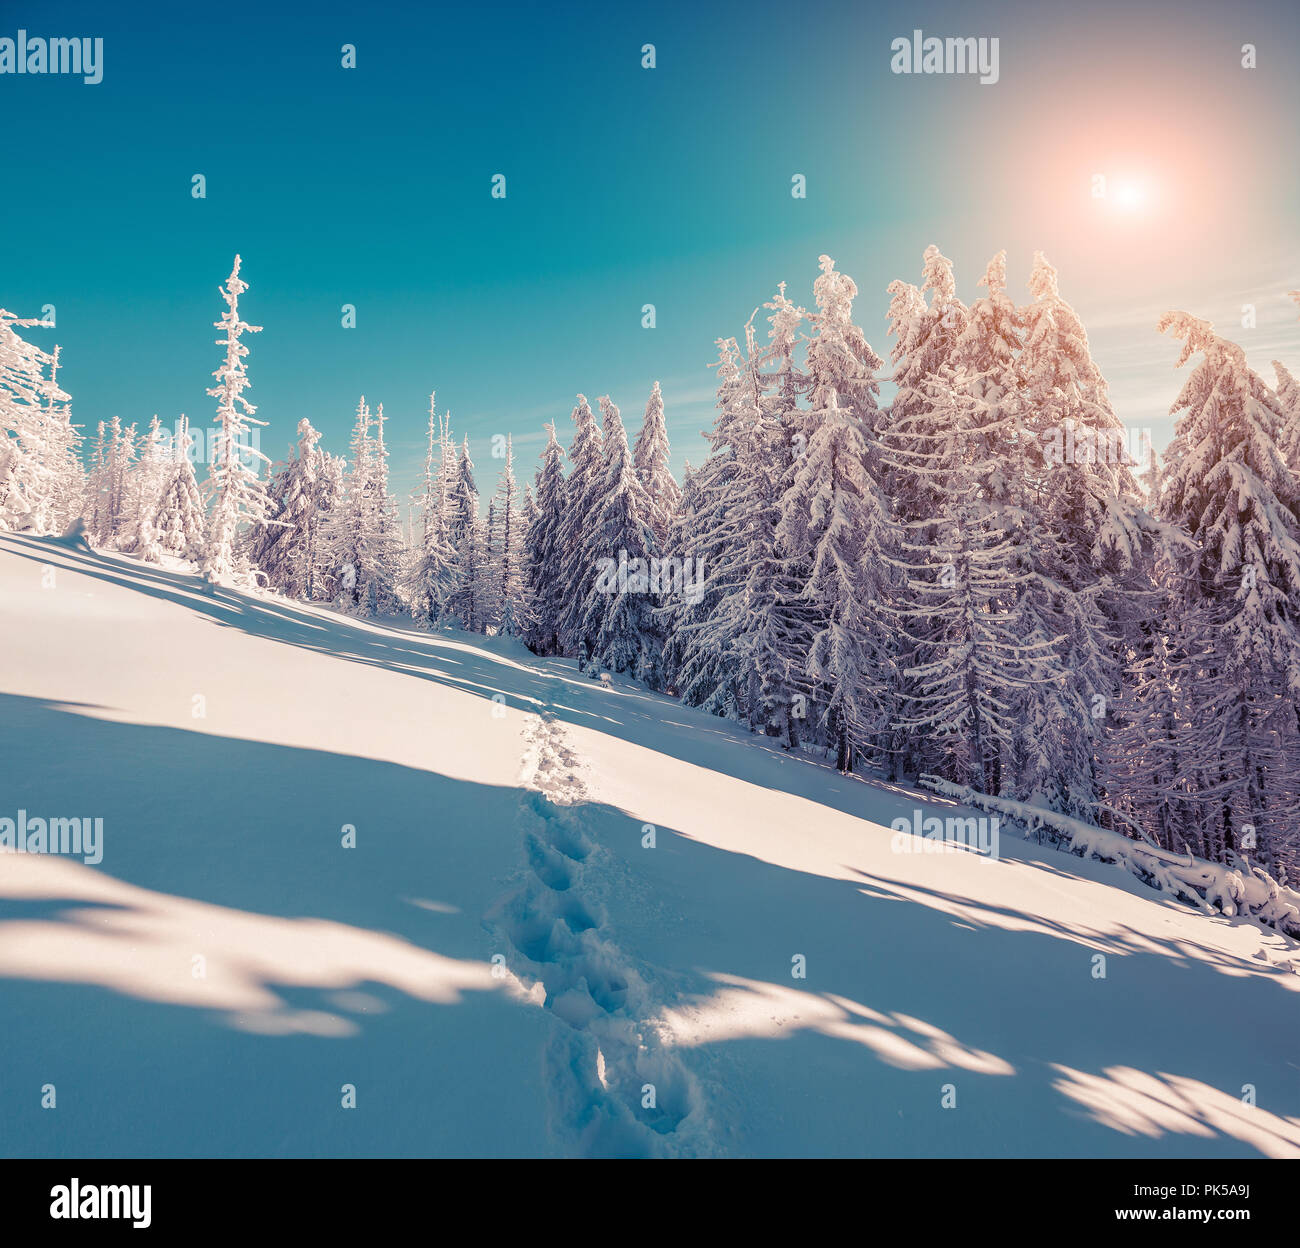 Sunny winter scene in the mountain forest with fir trees covered fresh snow. Instagram toning. Stock Photo